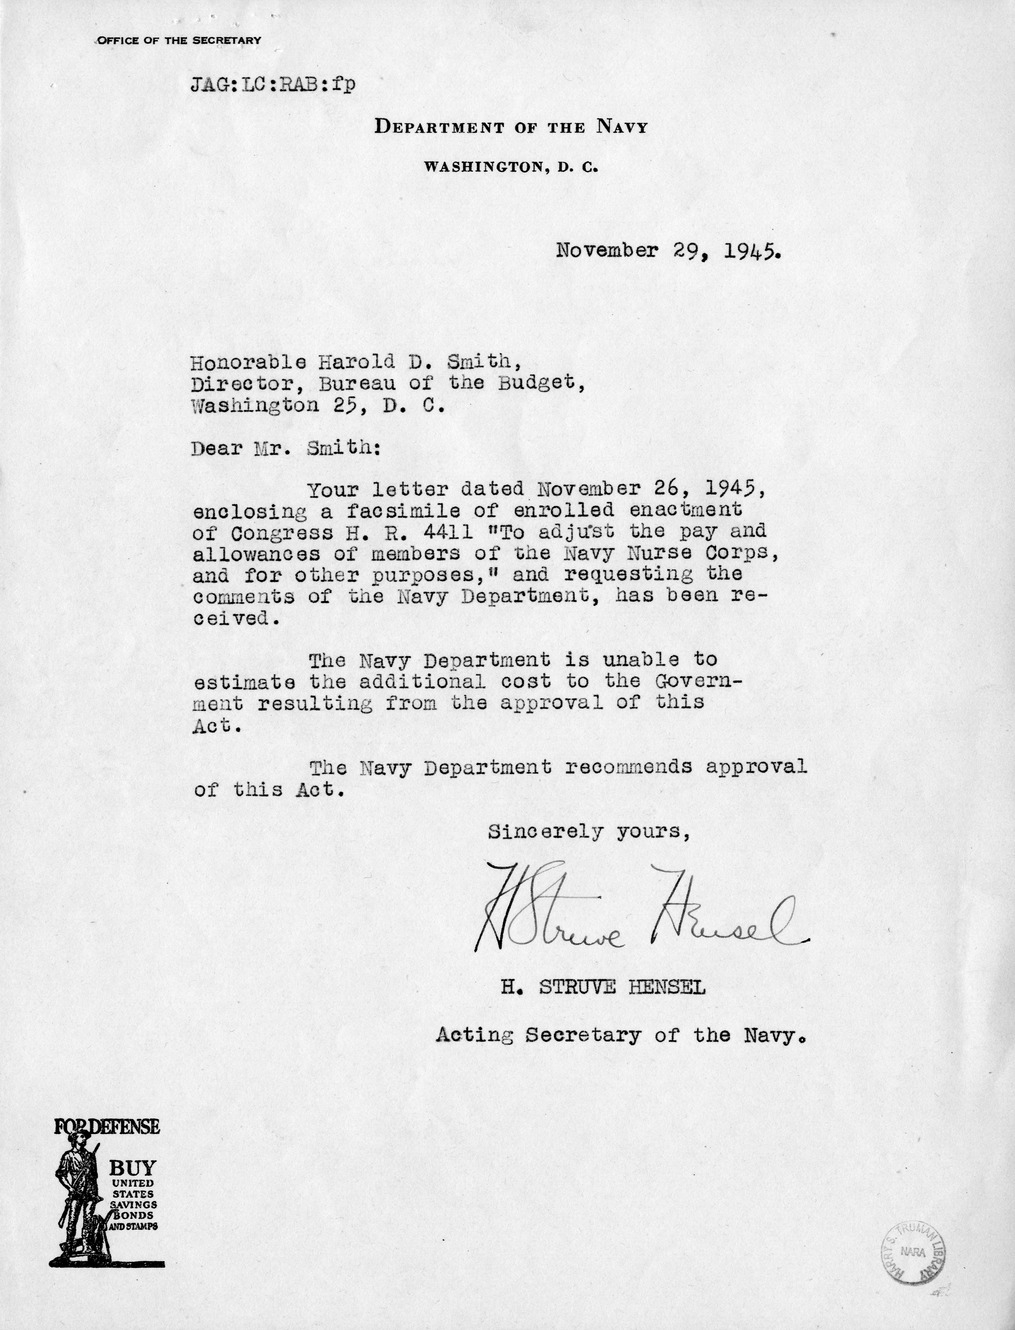 Memorandum from Harold D. Smith to M. C. Latta, H.R. 4411, To Adjust the Pay and Allowances of Members of the Navy Nurse Corps, and for Other Purposes, with Attachments